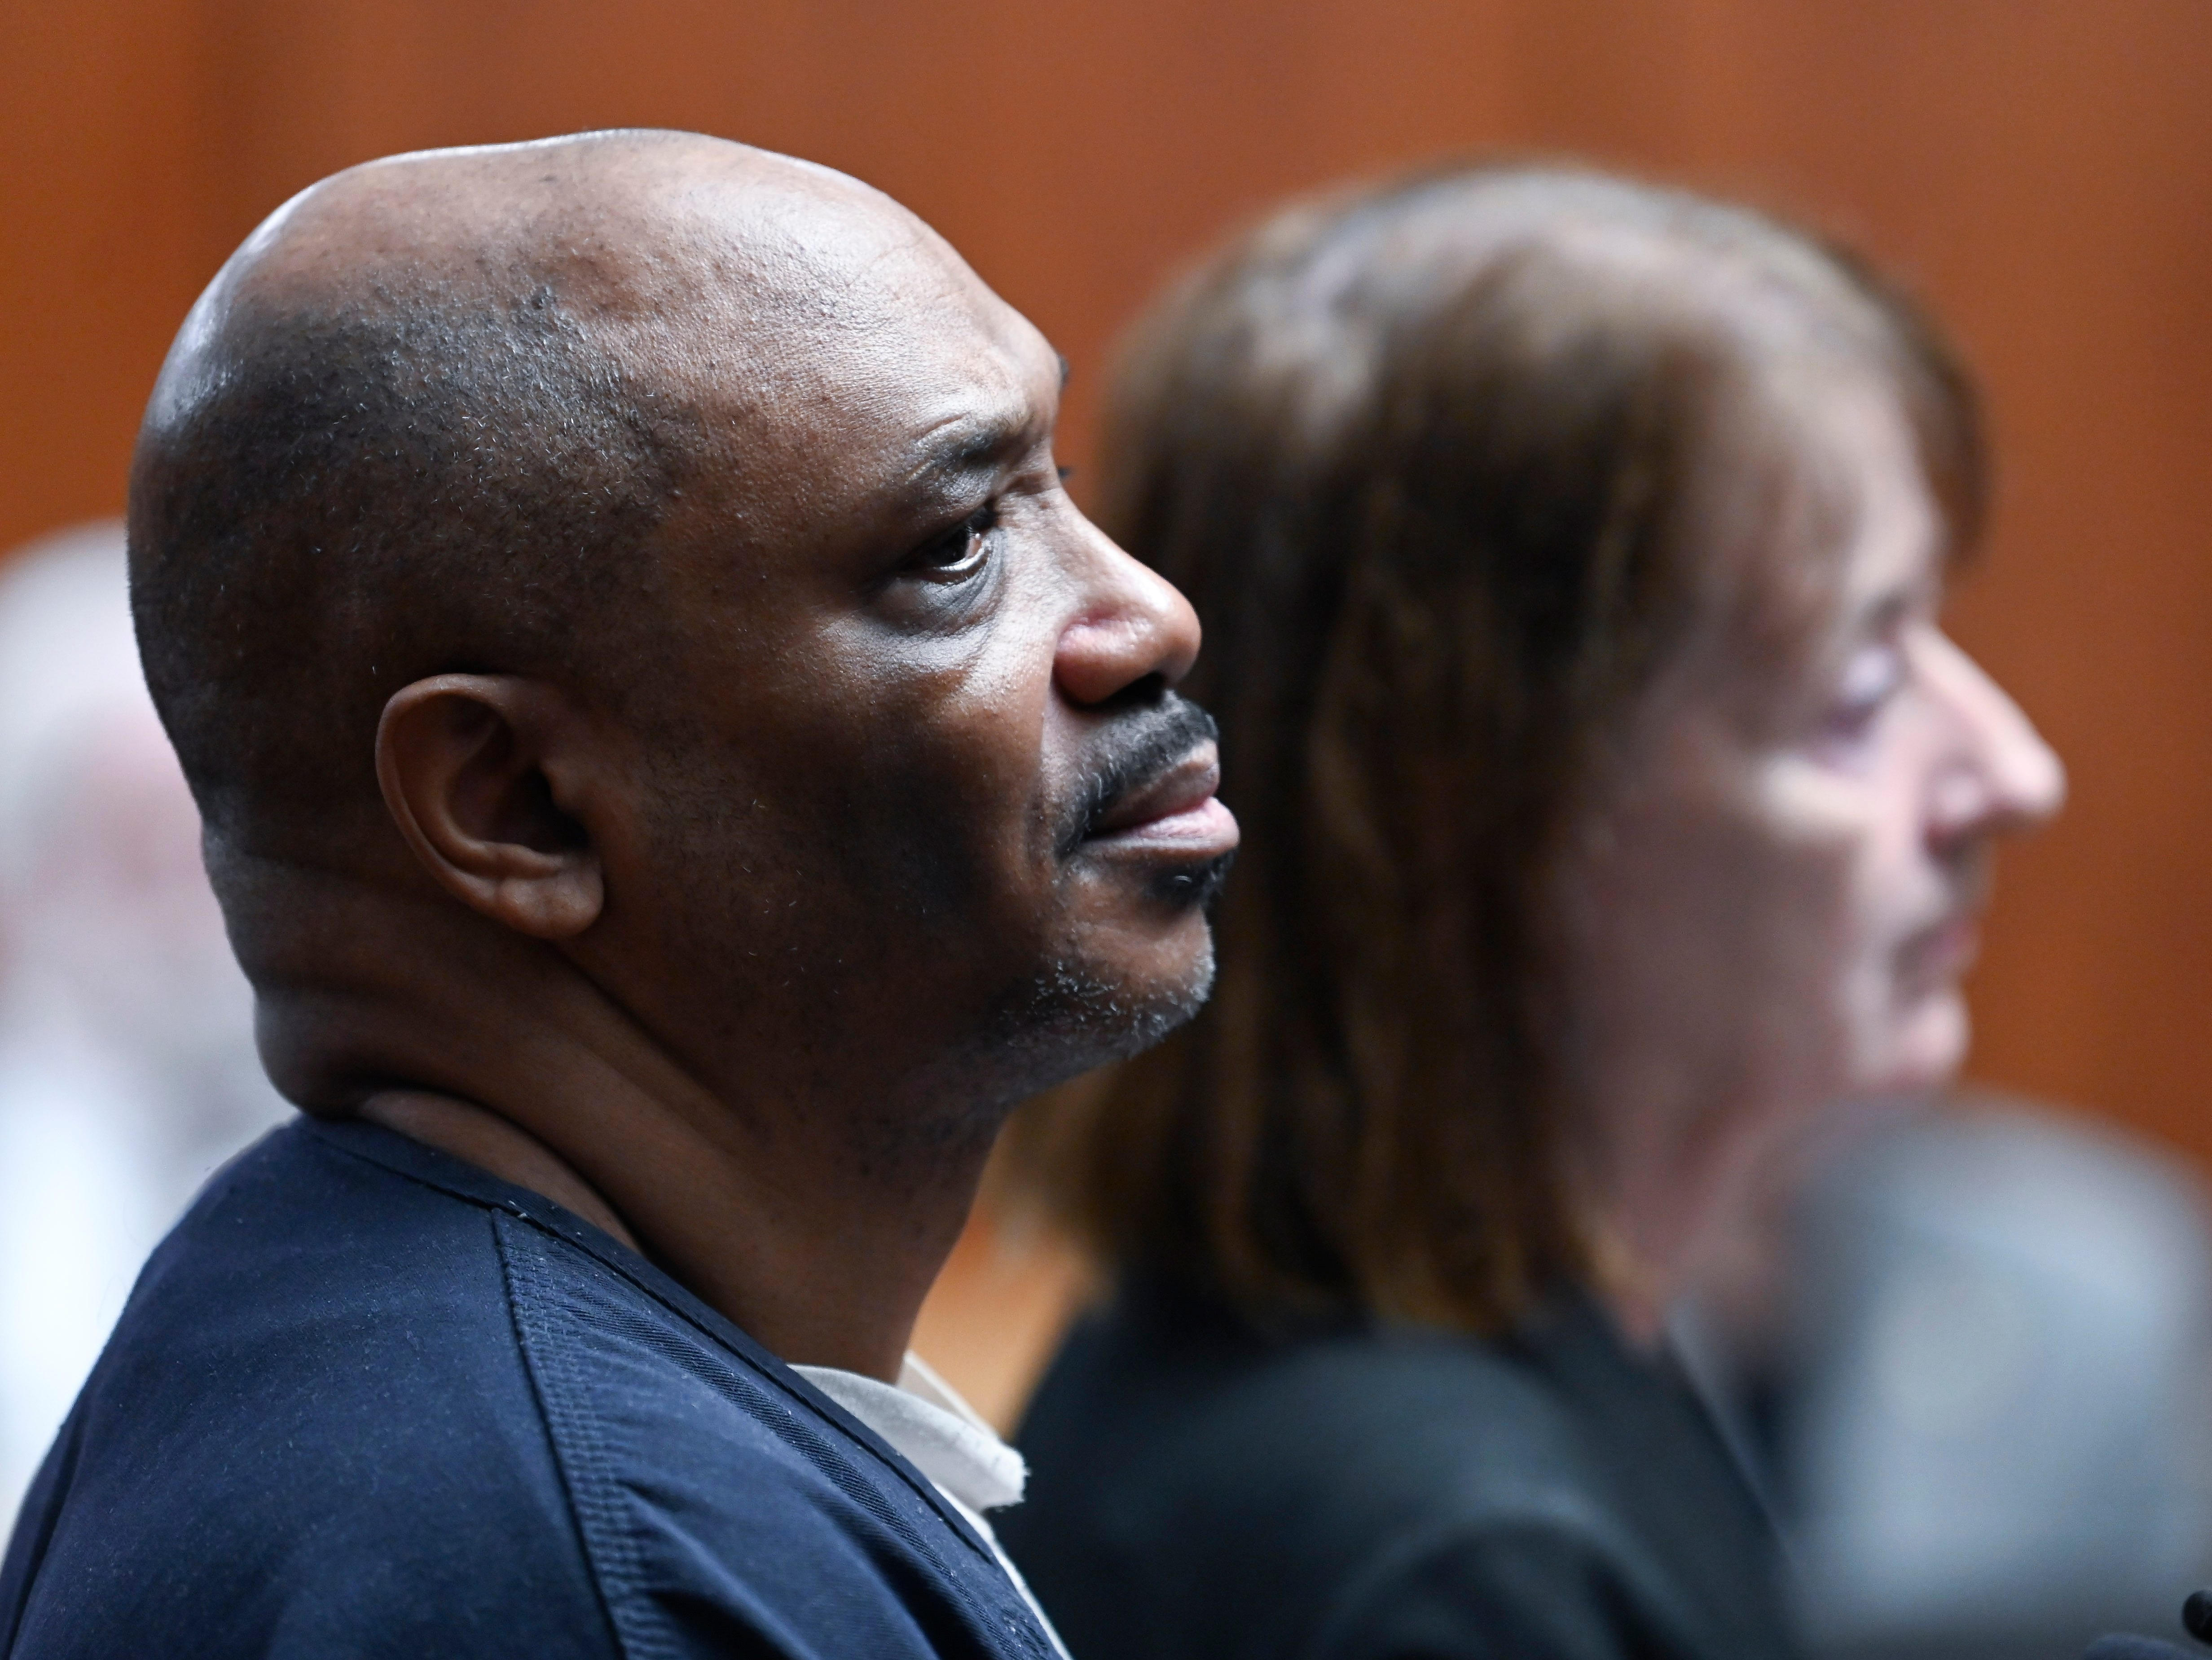 Murderer Arthur Williamson, left, stands with his defense attorney, Joan Morgan, as he is sentenced to life in prison without parole.